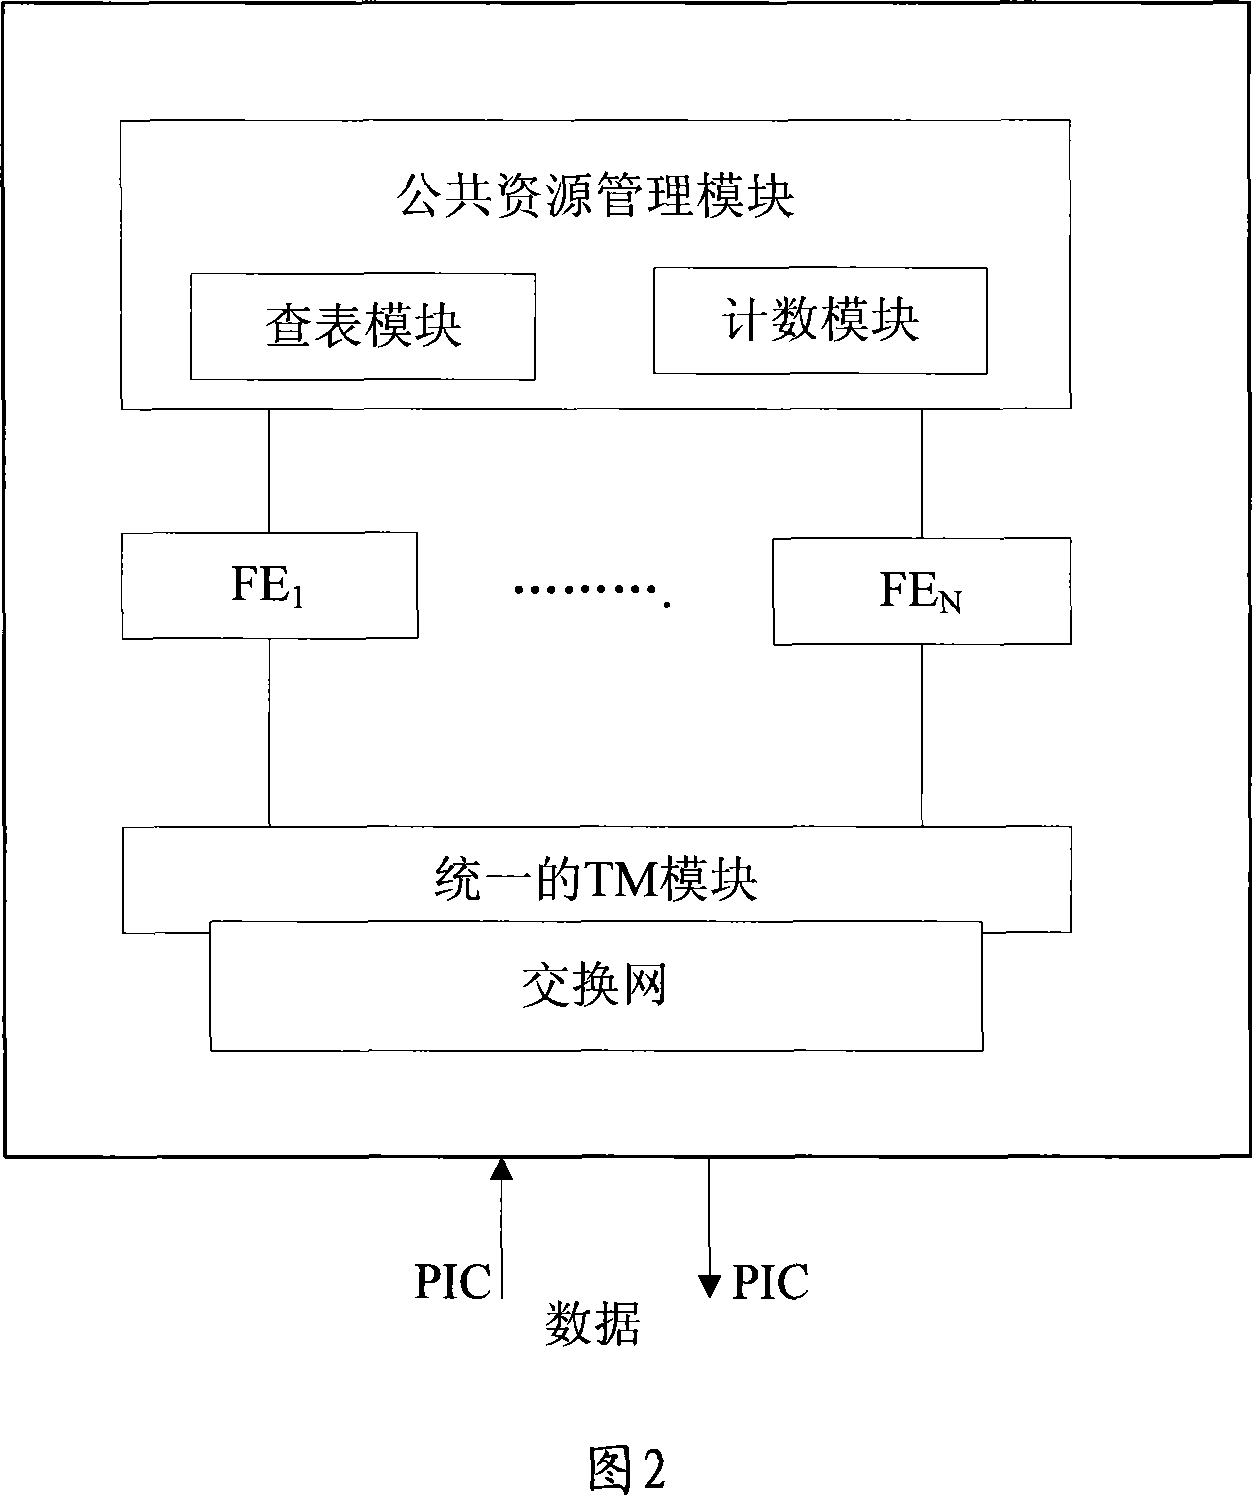 A data forwarding system and method